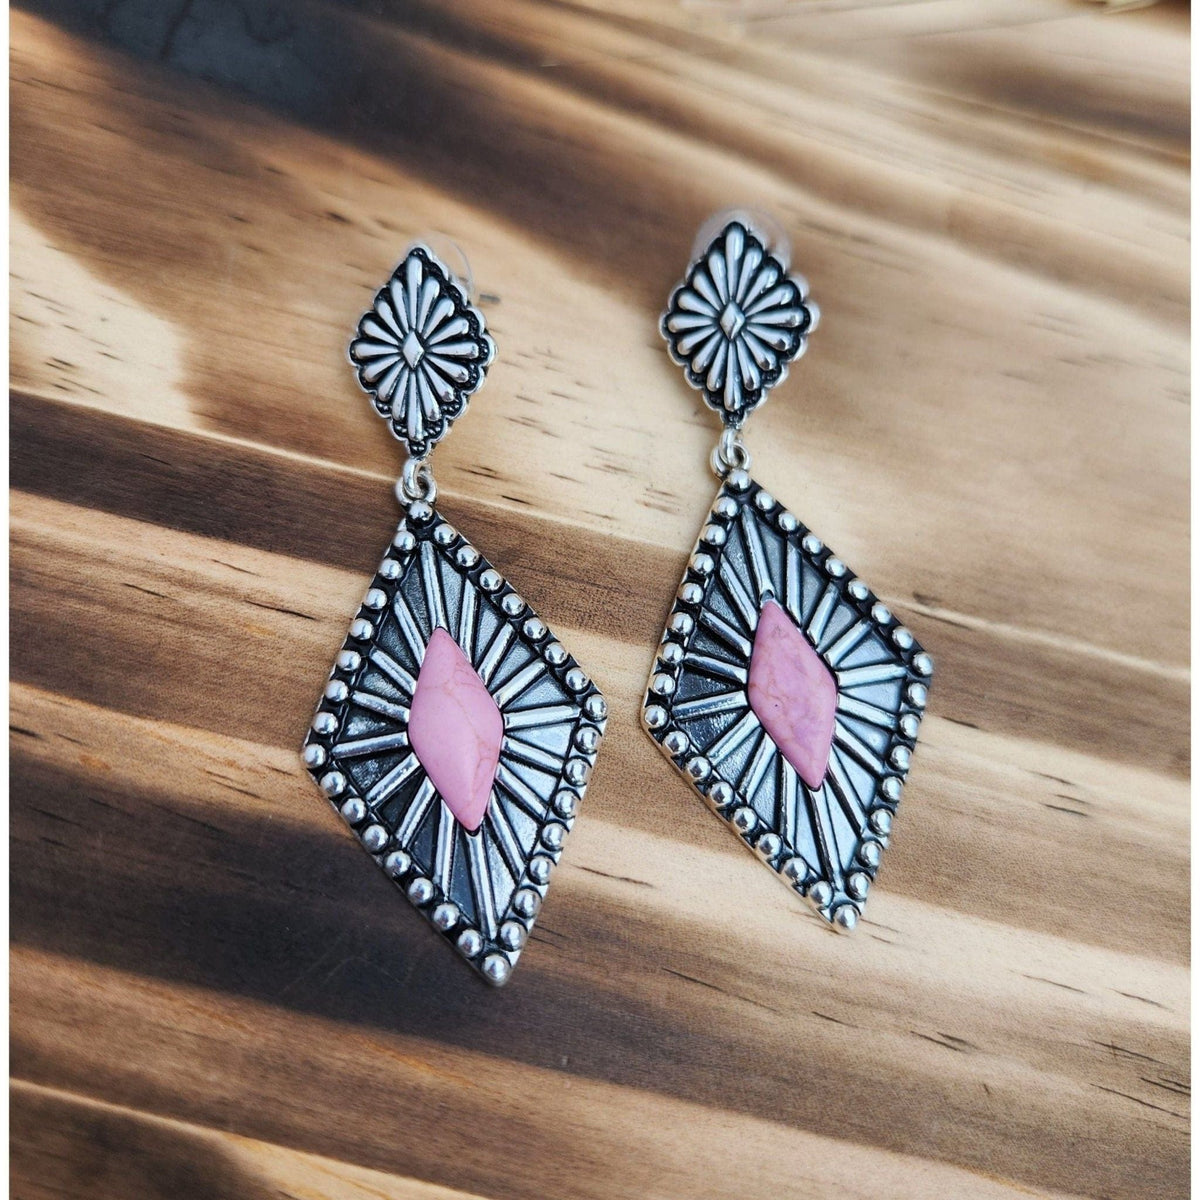 Bella | Pink and Silver Western Earrings | Dangle Diamond Earrings TheFringeCultureCollective